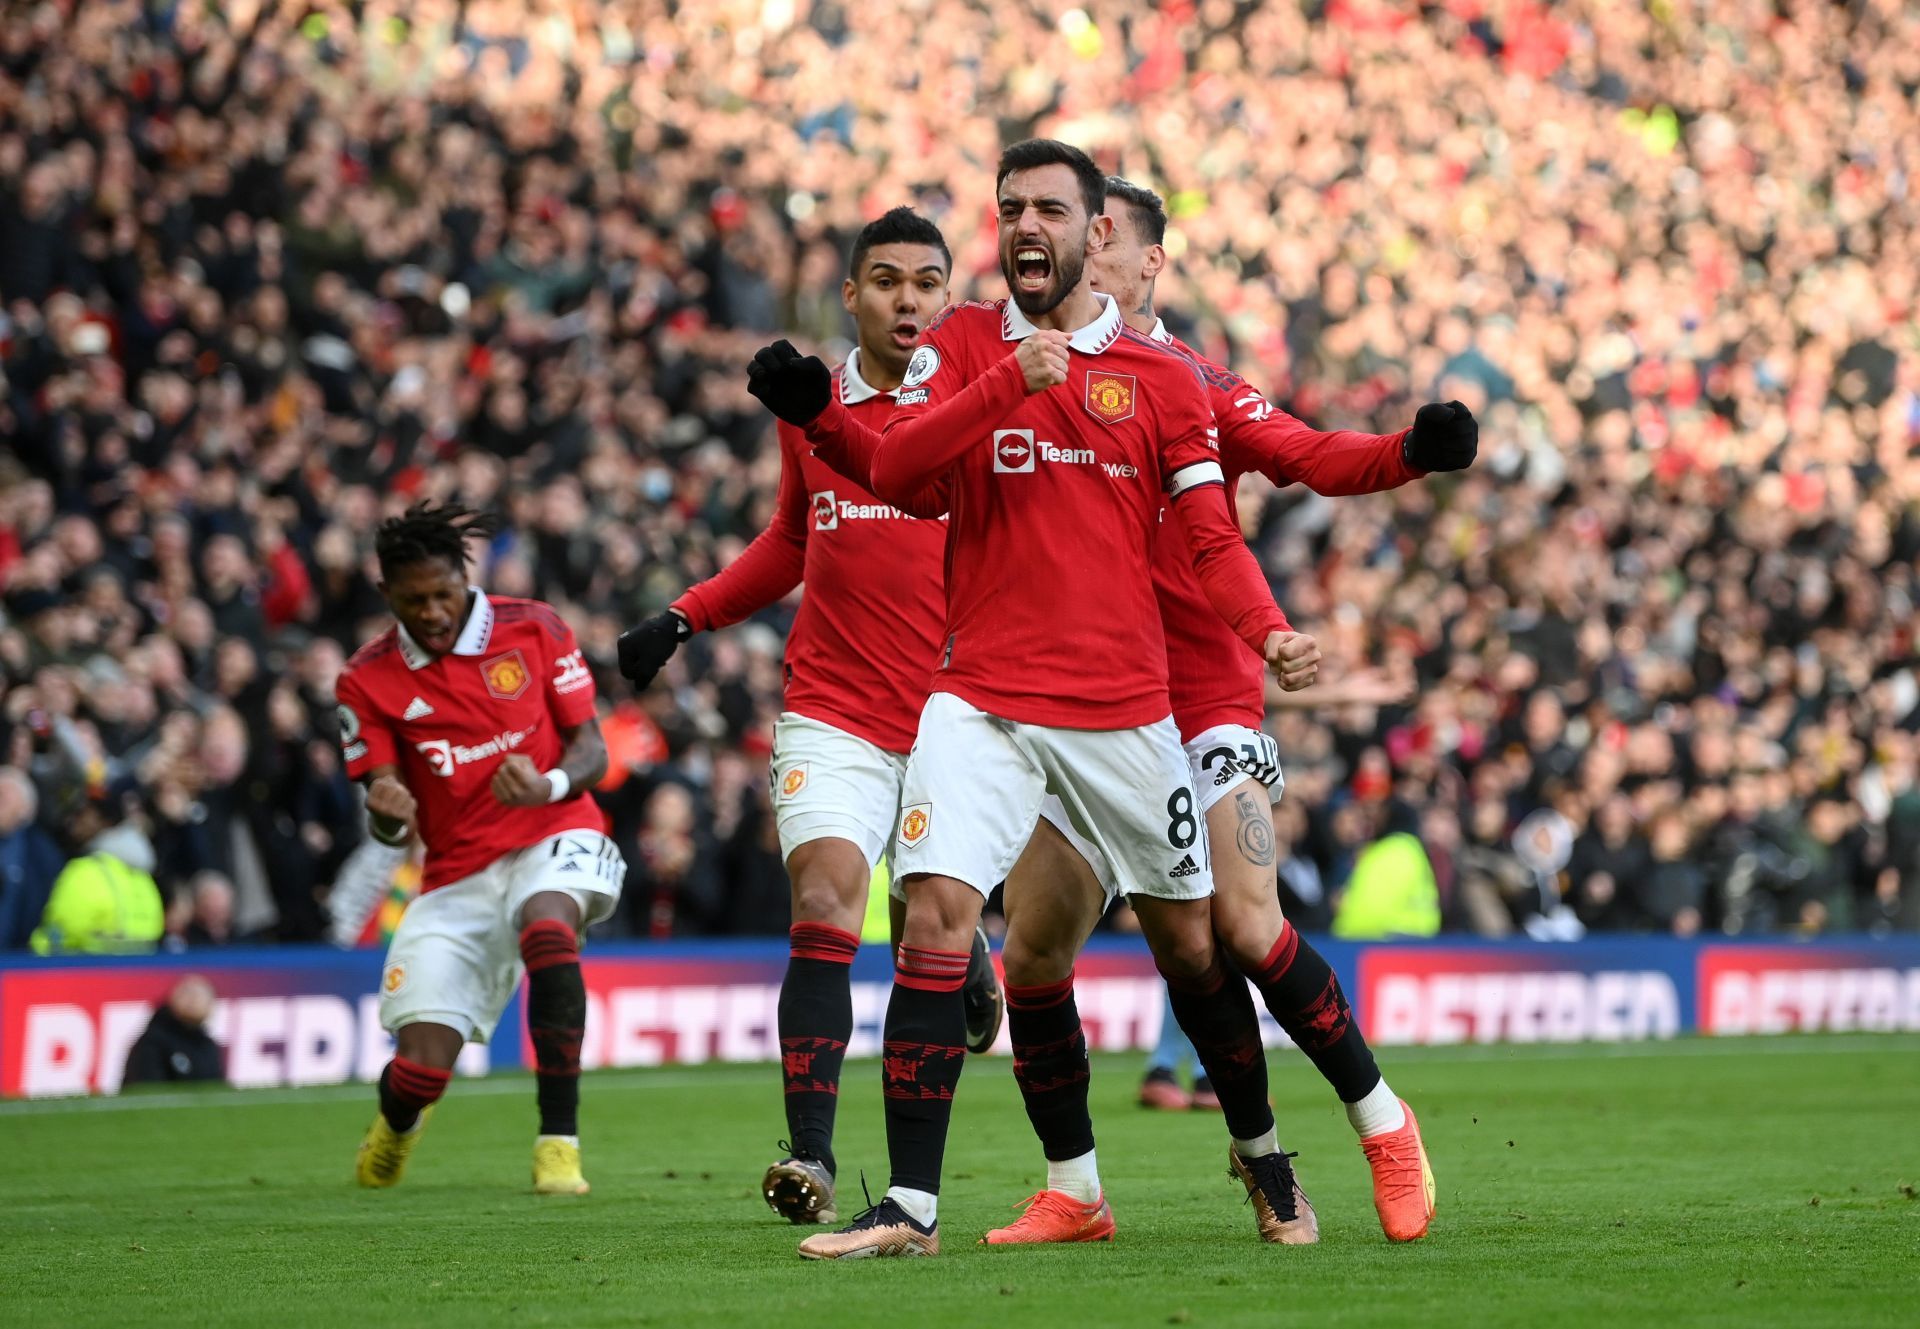 Manchester United staged a memorable comeback win in the derby.